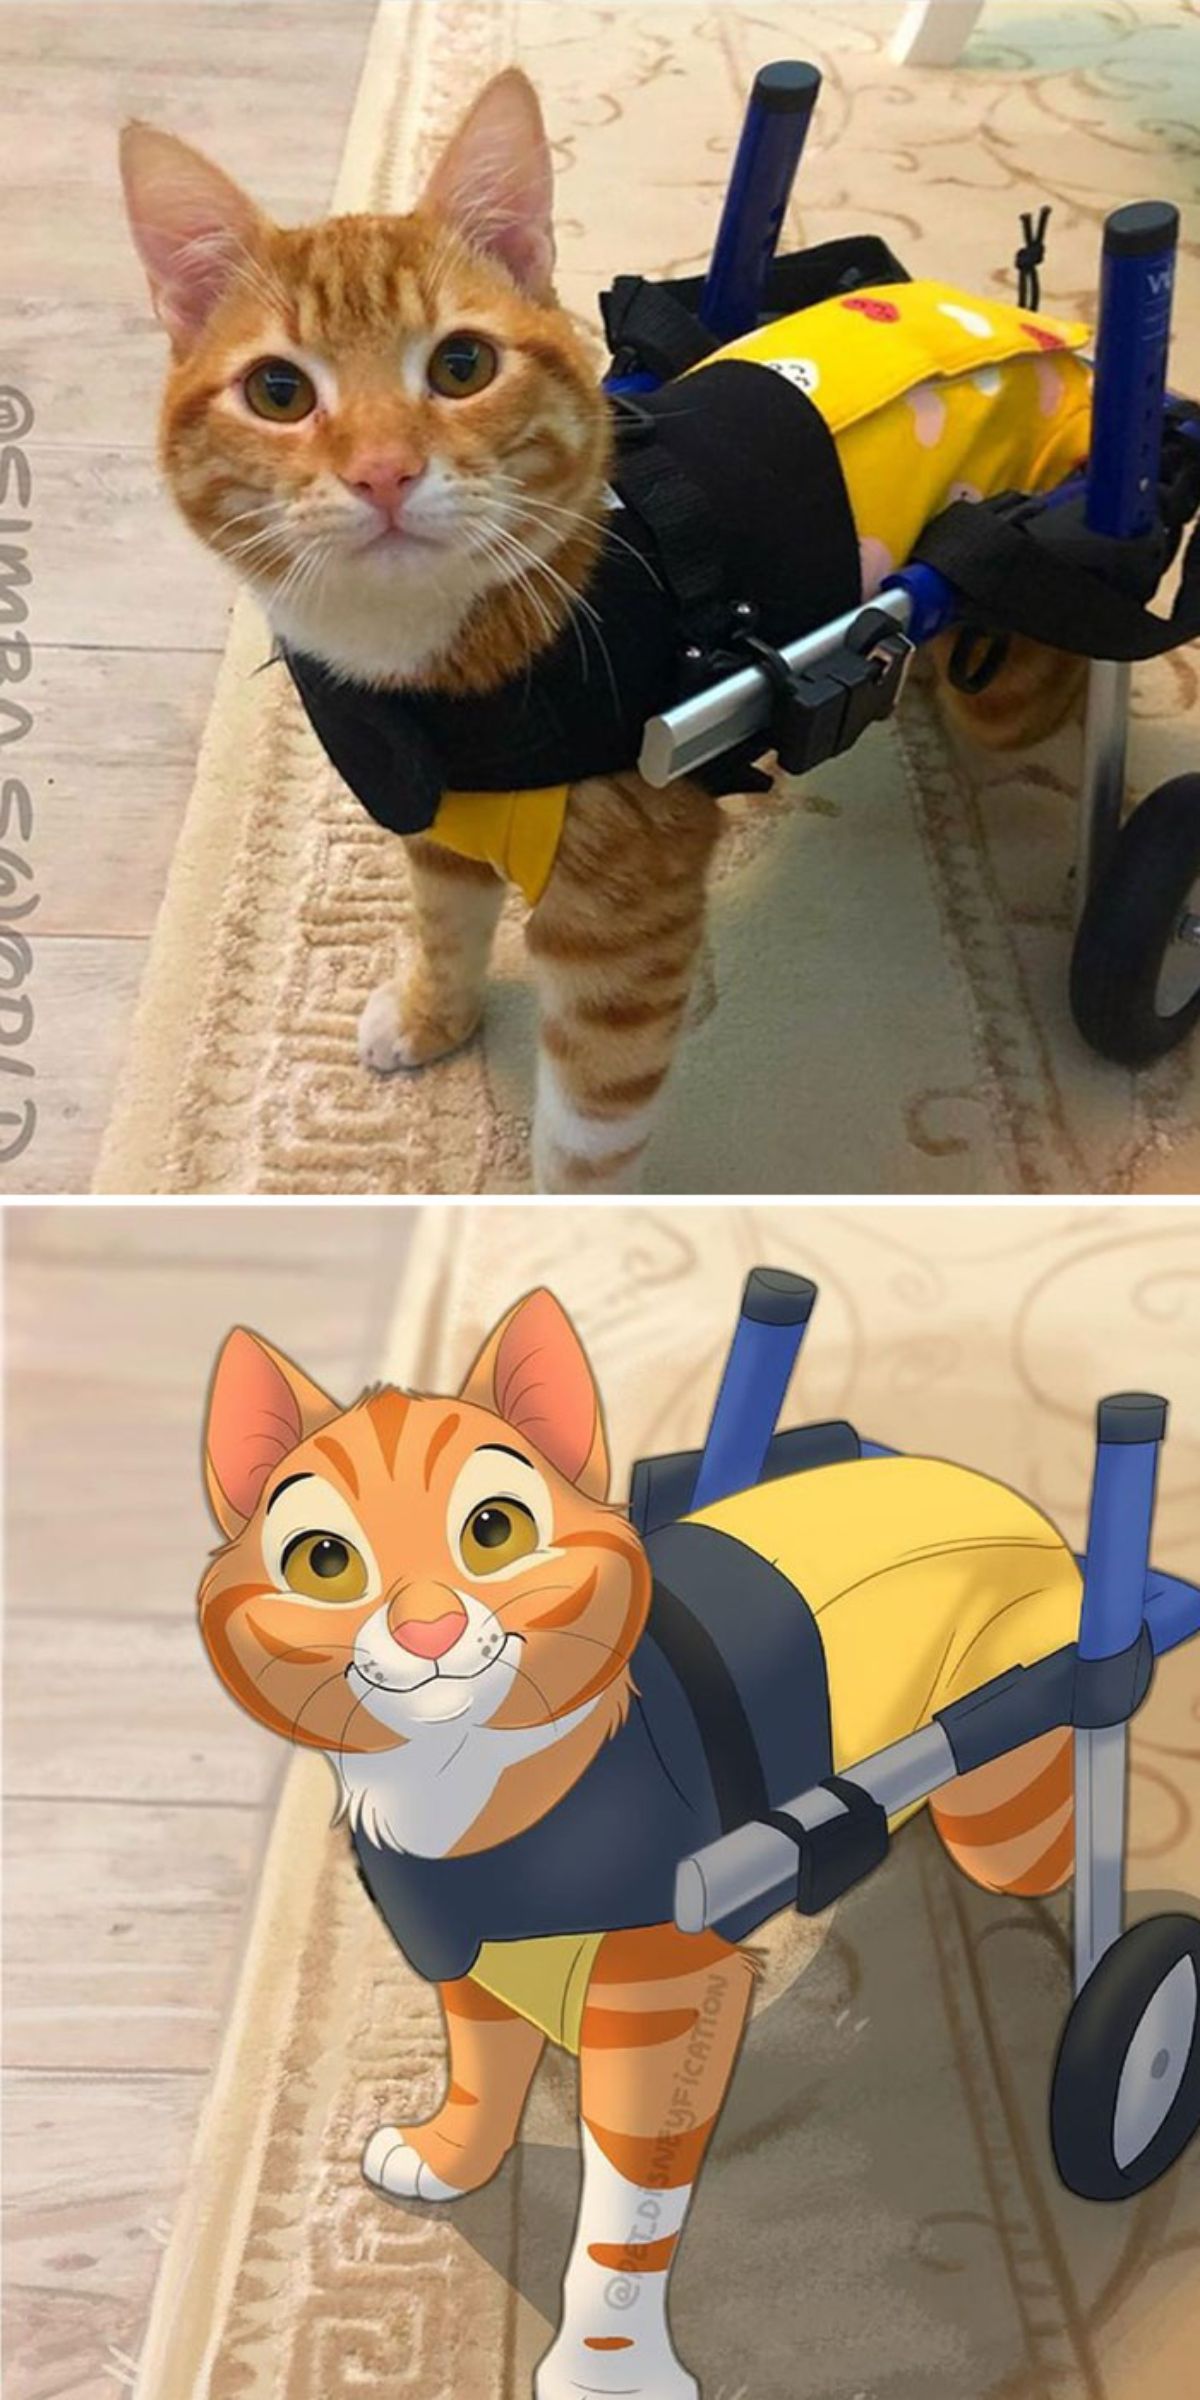 real photo and cartoon image of an orange and white cat with wheel legs